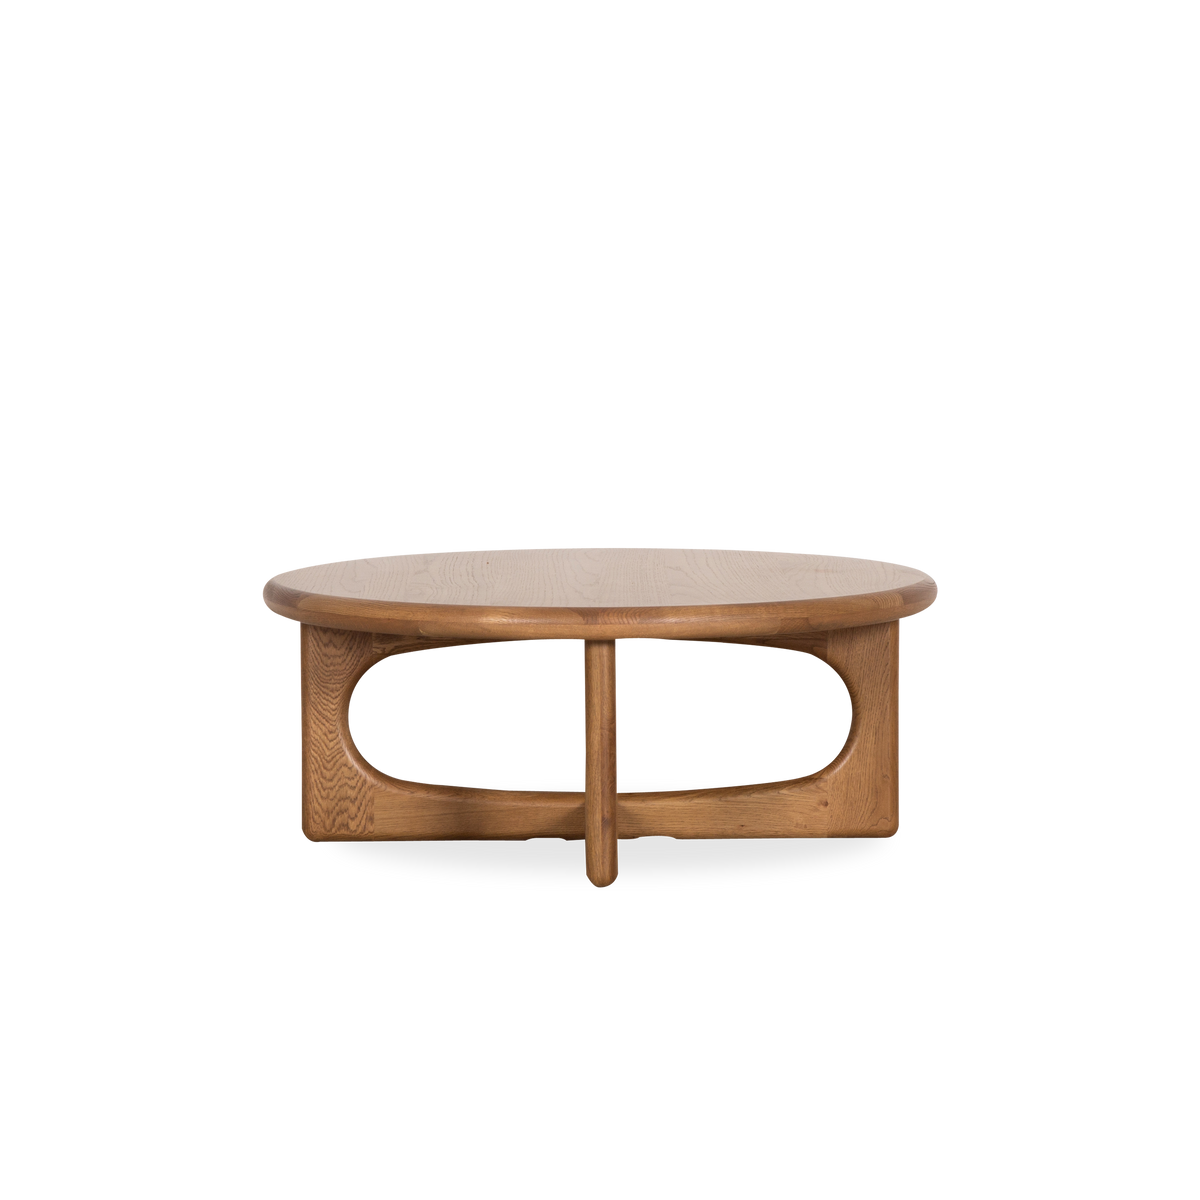 Channelling the organic forms of 1970s postmodernism, the Talon Coffee Table is a stylish and durable addition to any space.